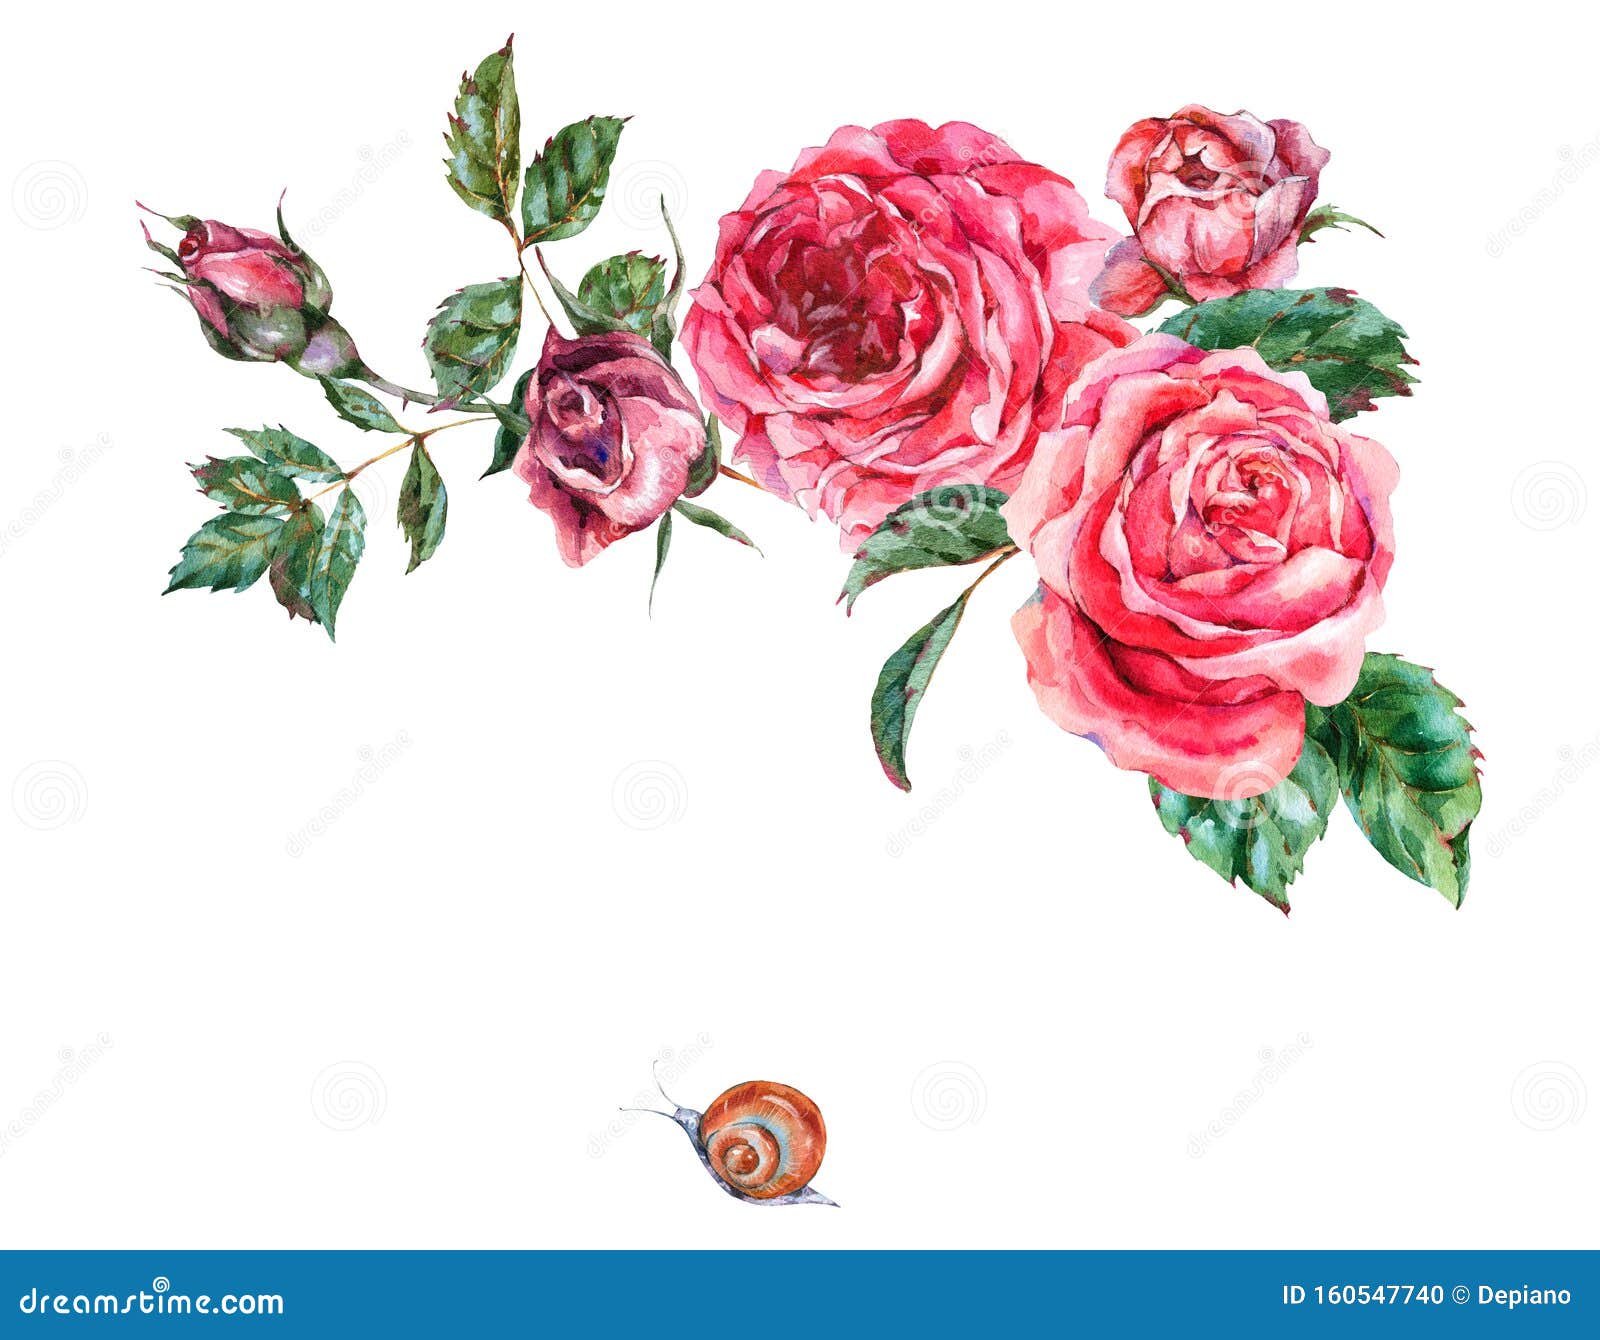 Decorative Vintage Watercolor Red Roses, Nature Greeting Card With Flowers, Leaf, Buds And Snail Stock Illustration - Illustration Of Flora, Border: 160547740